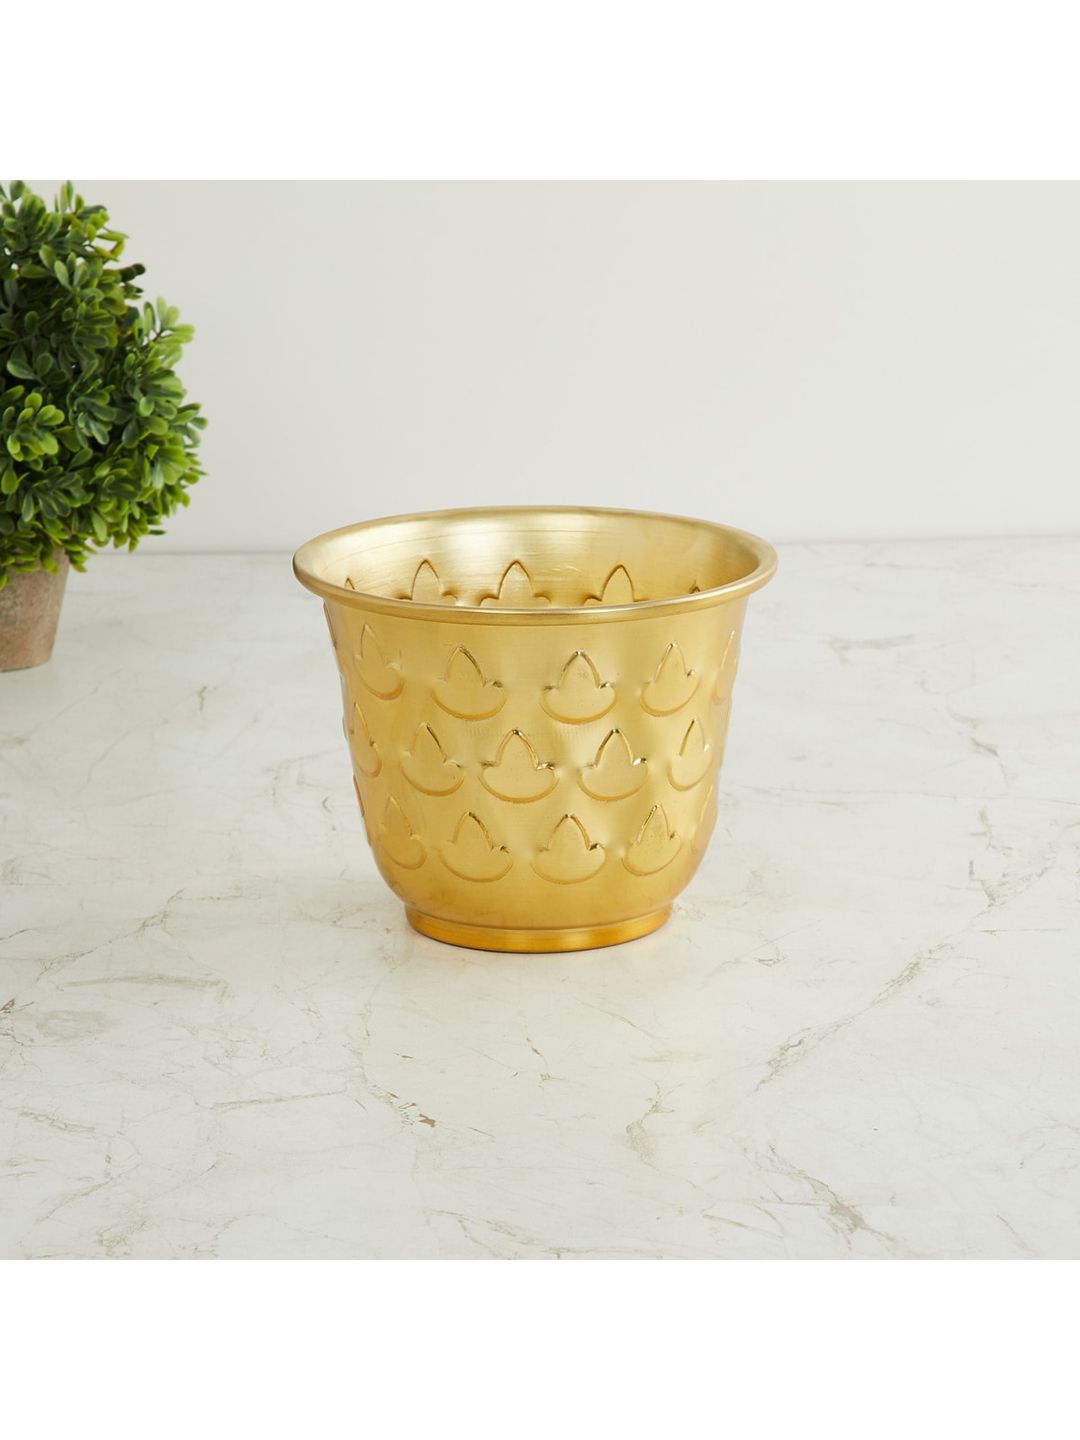 Home Centre Gold-Toned Textured Fiesta Planter Price in India